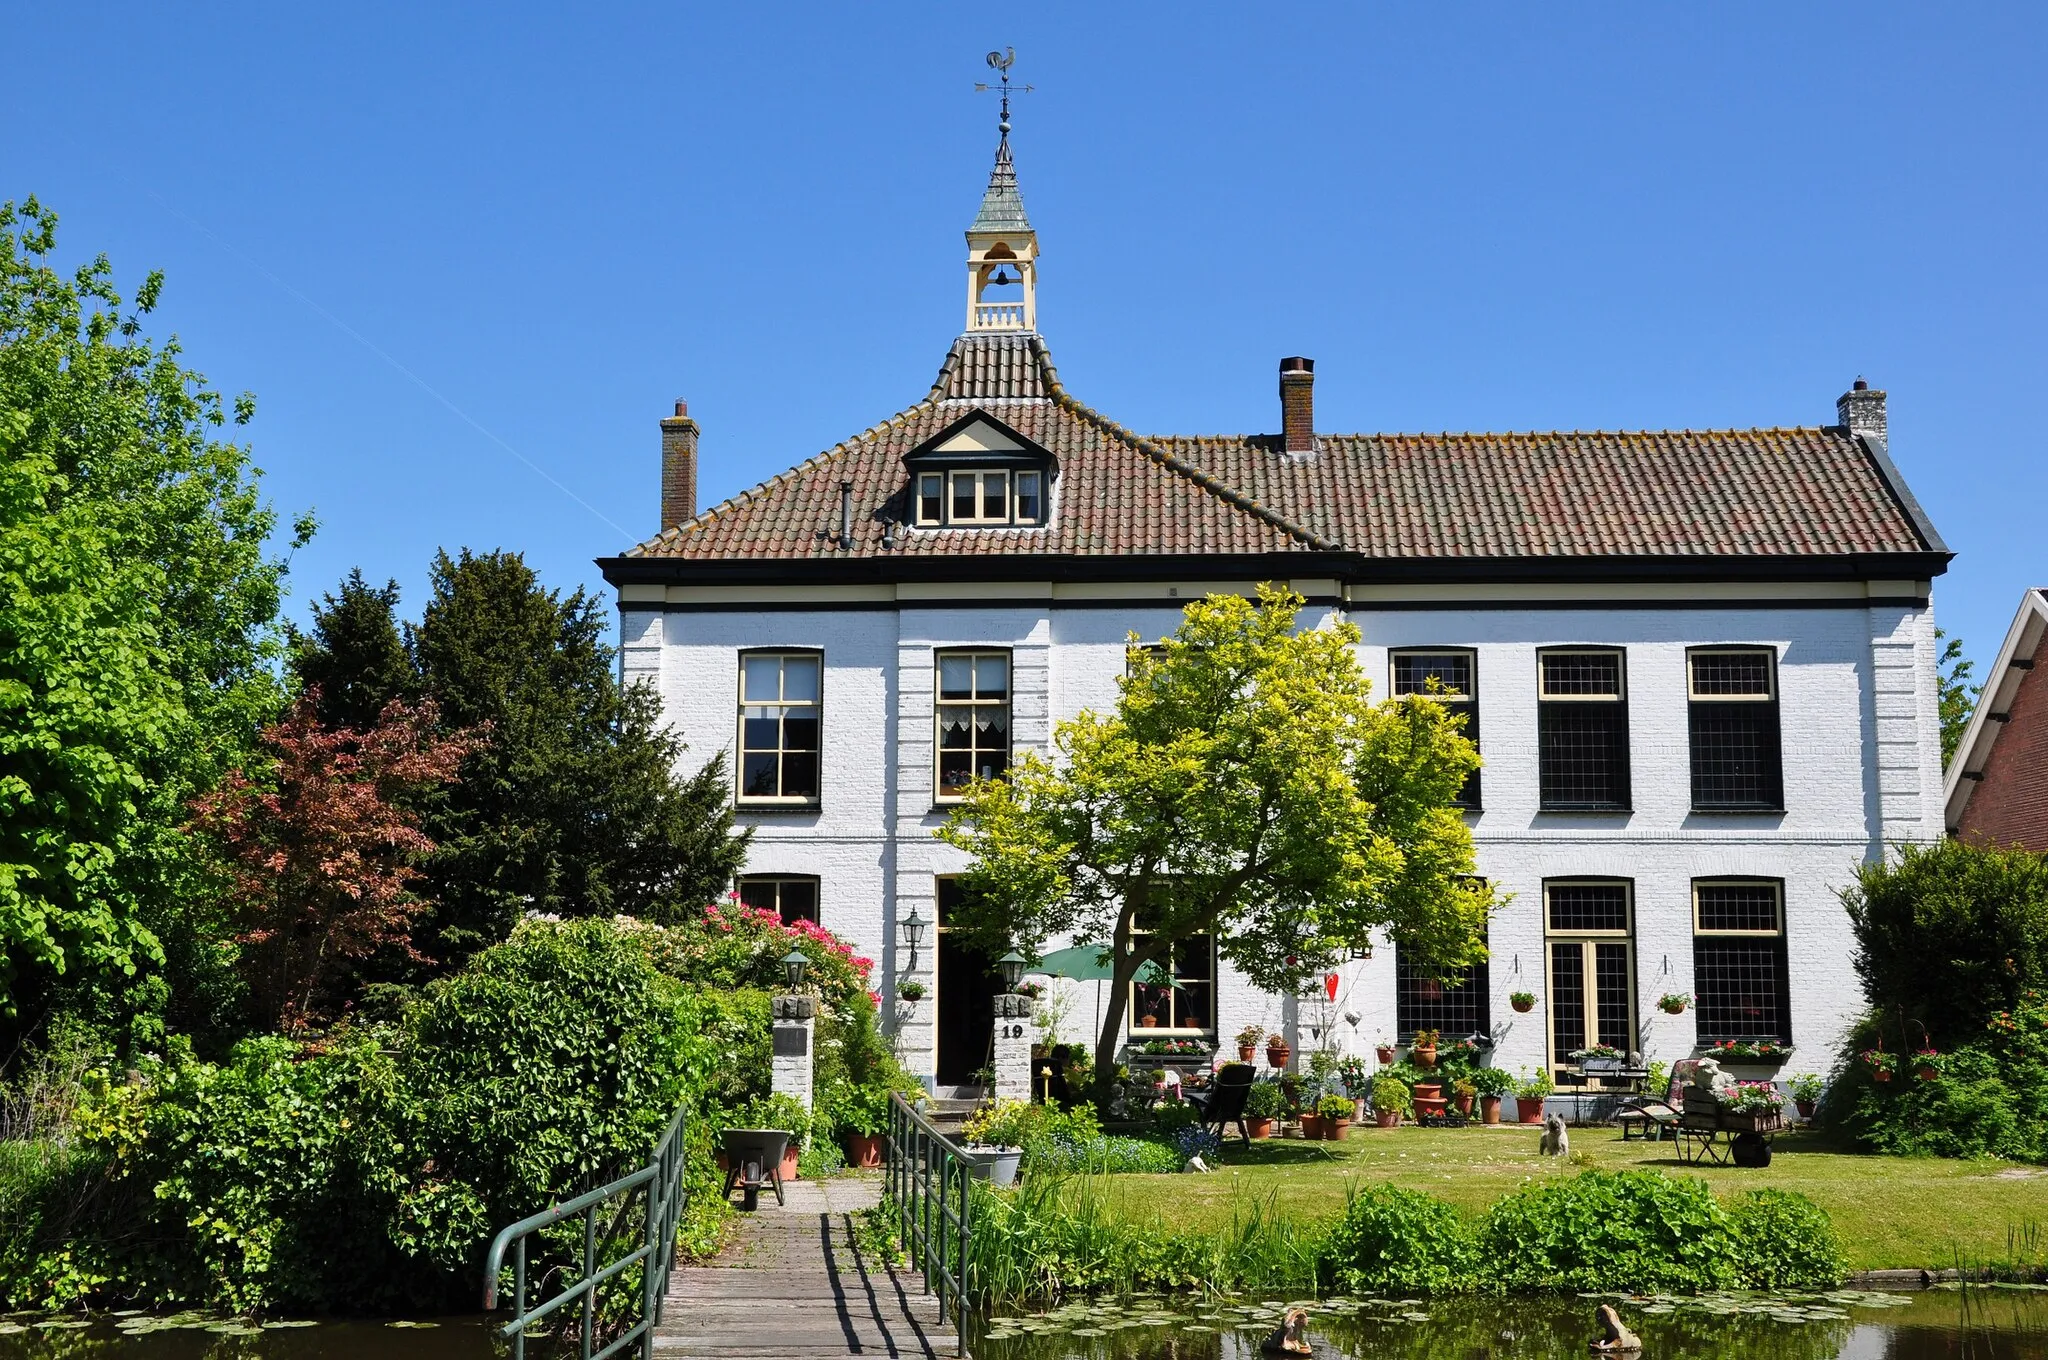 Photo showing: Former monastery of the Franciscan Order, containing a girls' school, in Zoeterwoude (Municipality of Zoeterwoude, Province South Holland, Netherlands). The building is from 1880. The Franciscan nuns left around 1965-1970.